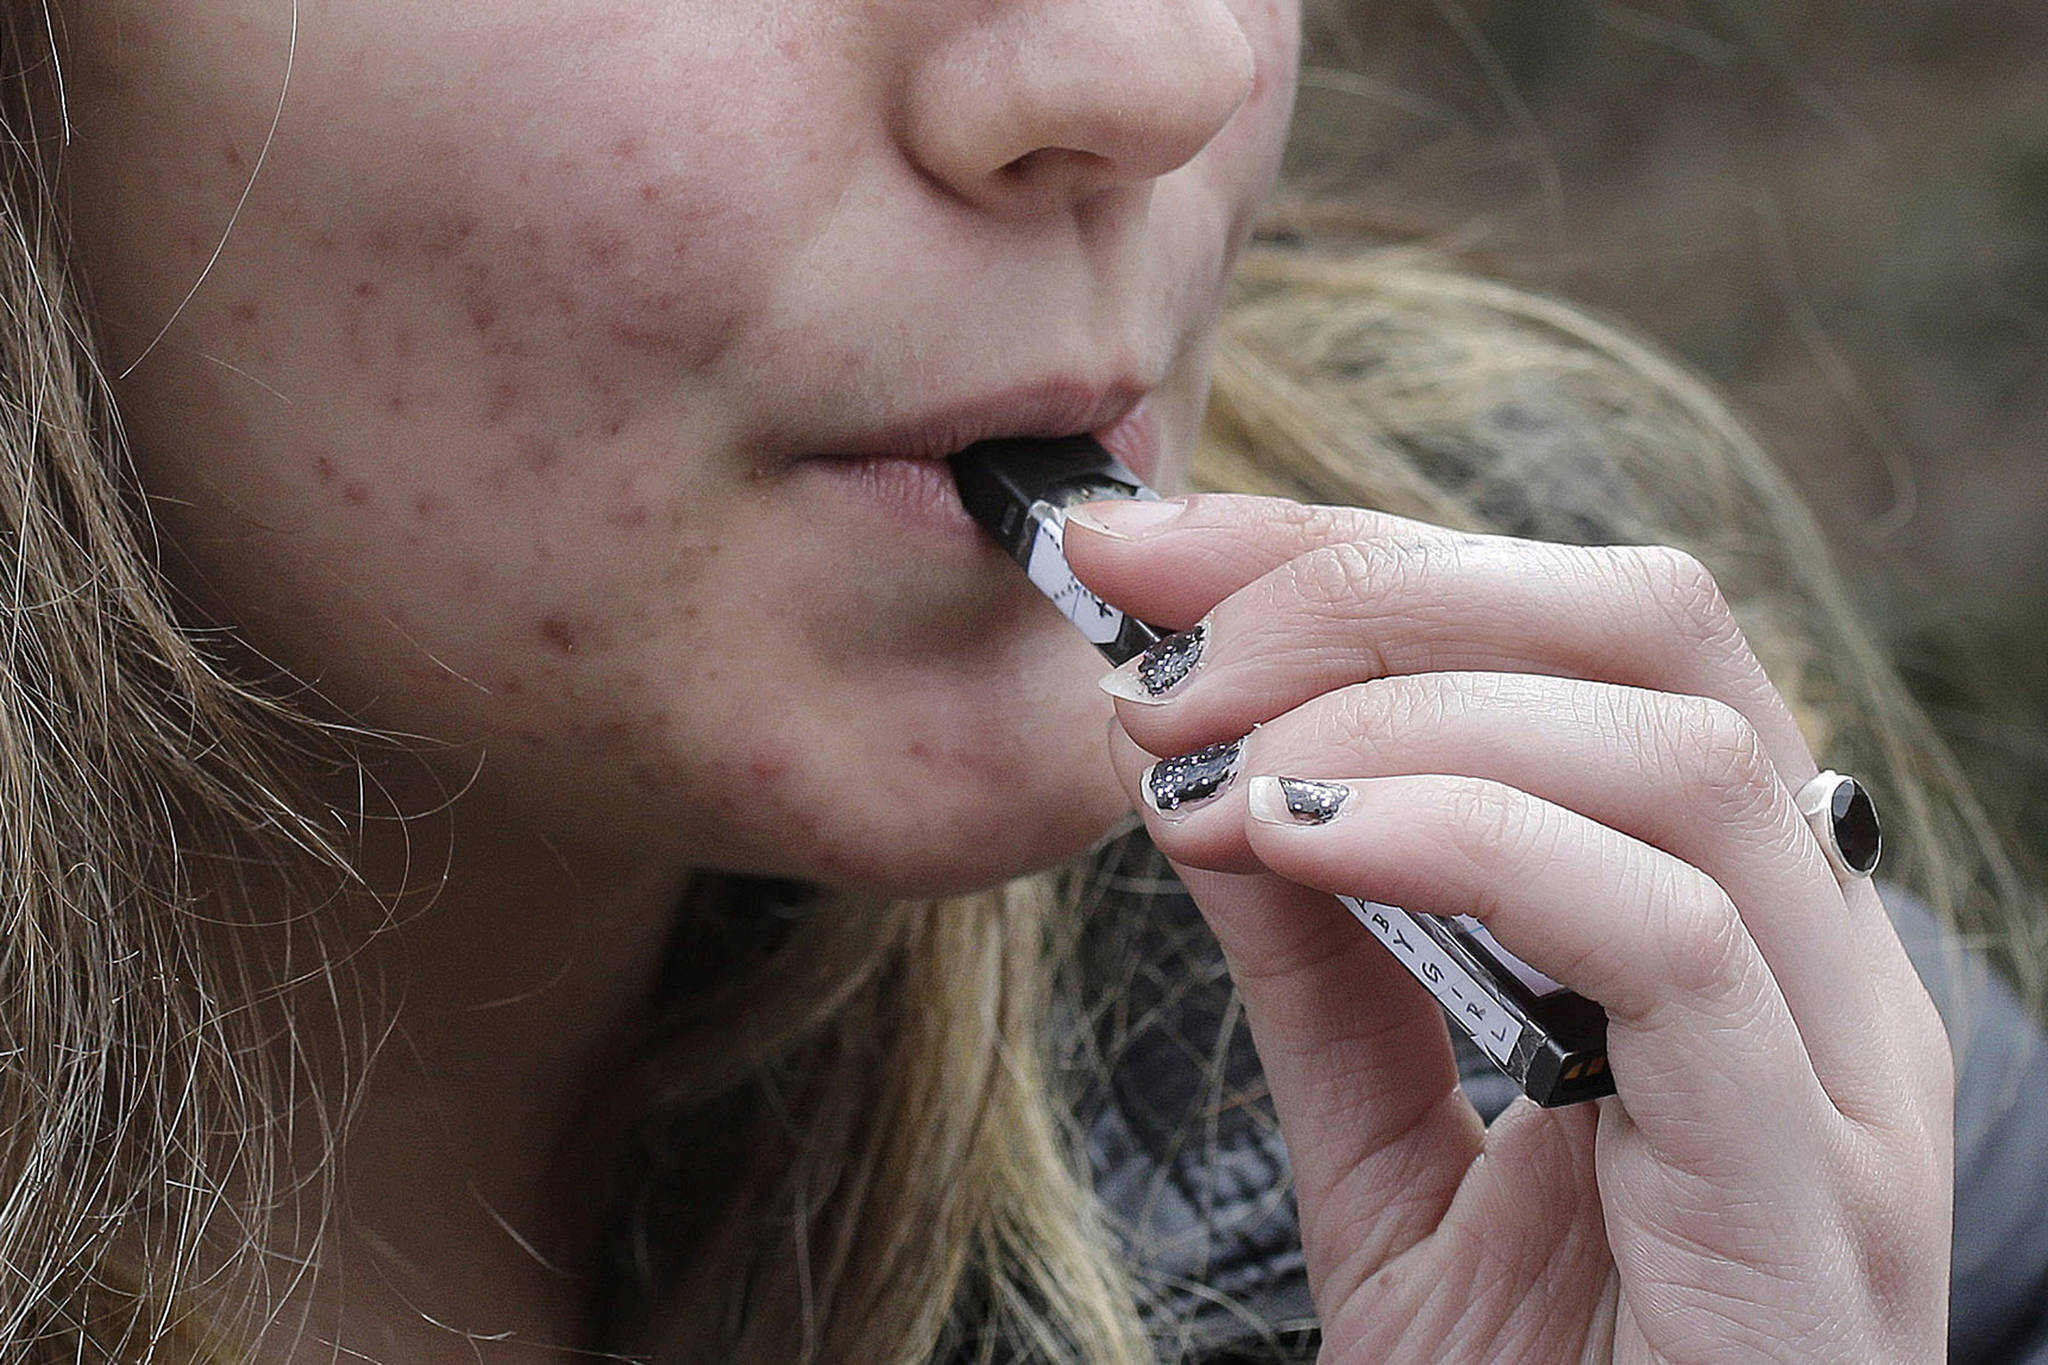 Opinion: If you know youth who vape, help them understand the risks